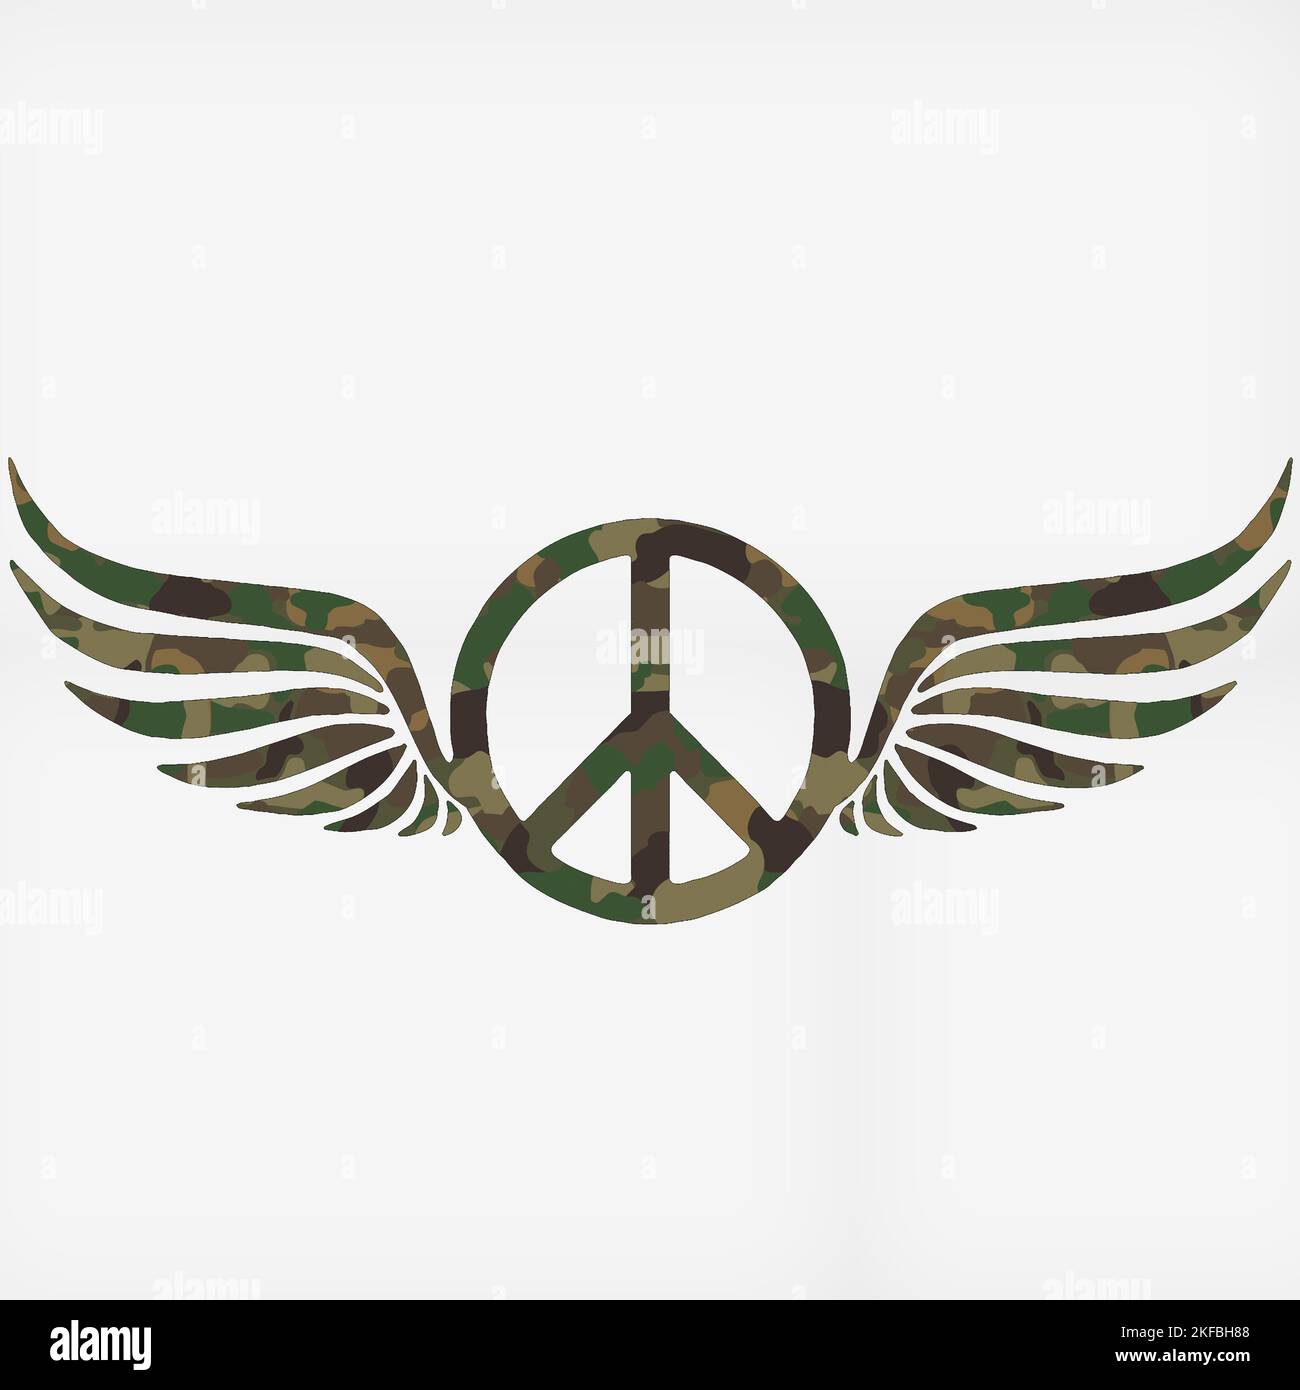 Royalty free camouflage pattern of different natural colours form a peace sign. Wings symbolise a dove of peace. Vector illustration. Stock Vector